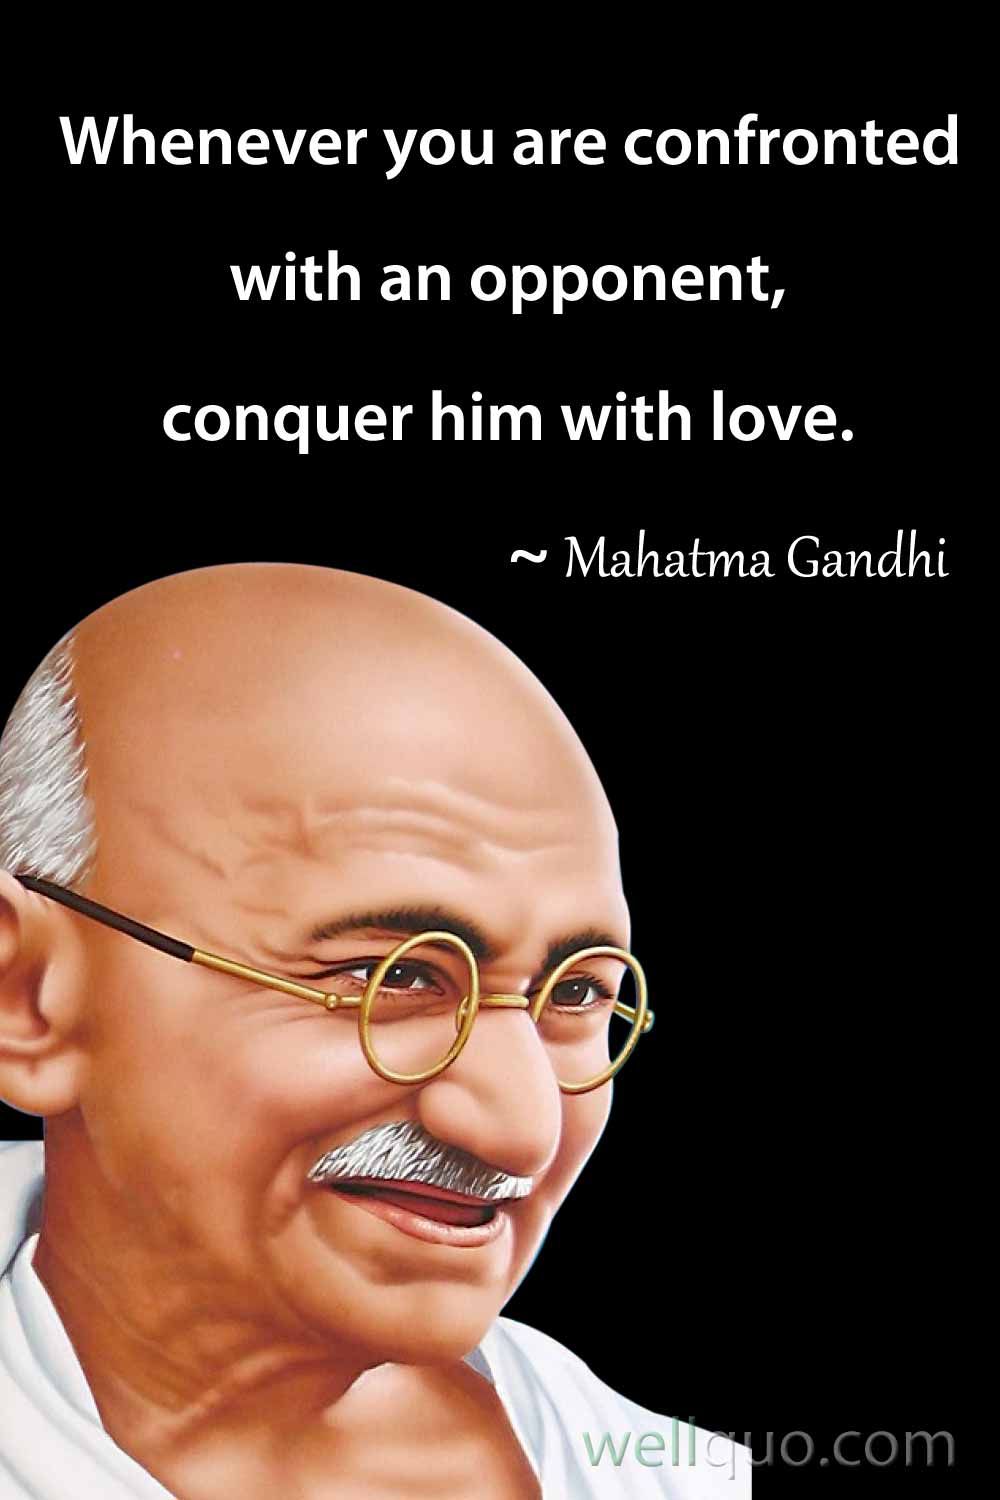 Mahatma Gandhi Quotes on Forgiveness and Love - Well Quo